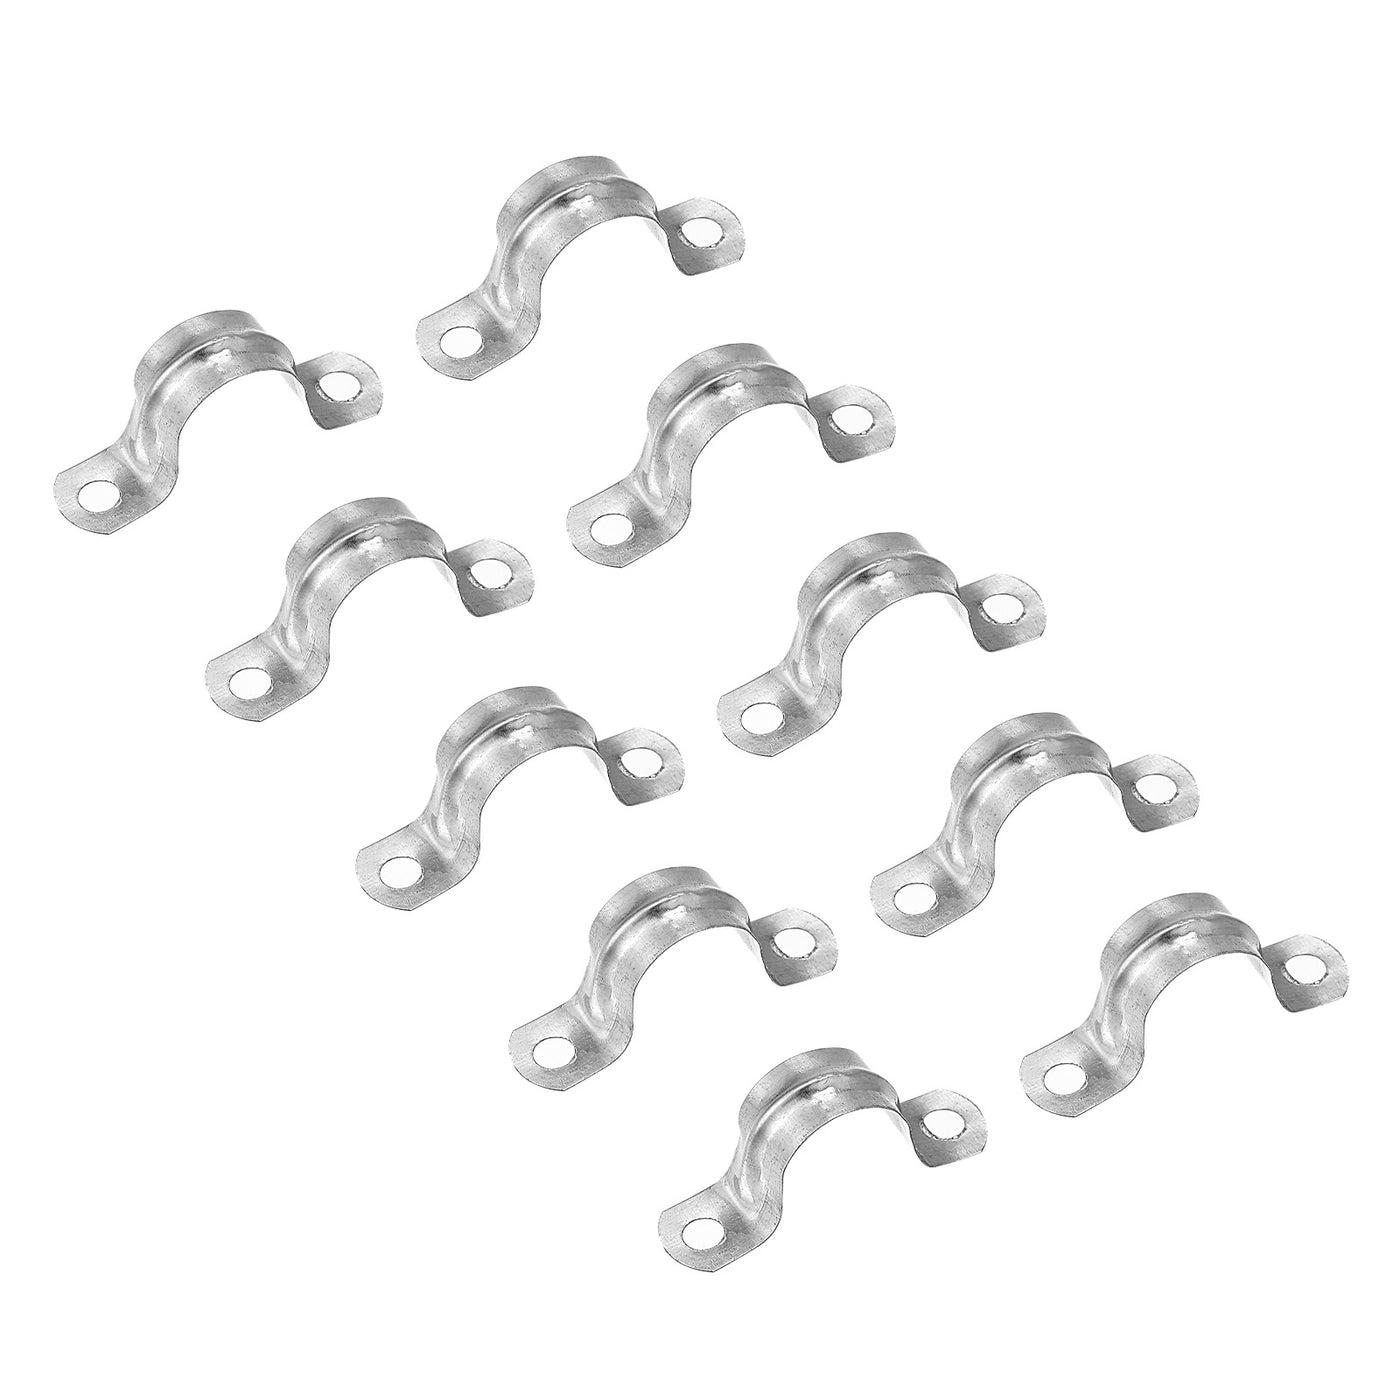 uxcell Uxcell Rigid Pipe Strap 16pcs 3/4" (20mm) Carbon Steel U Bracket Tension Tube Clamp